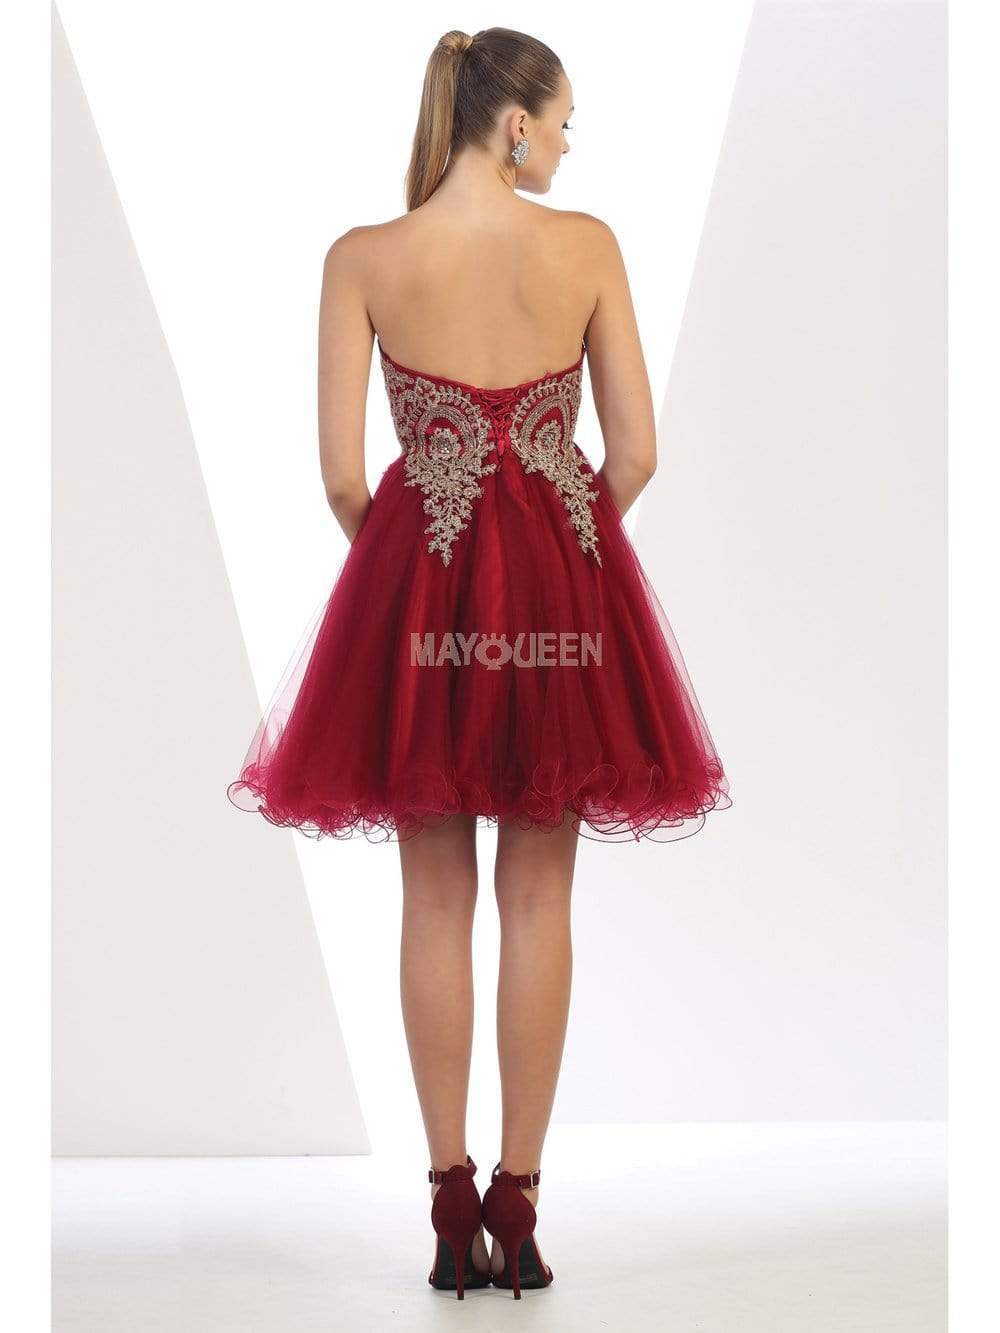 May Queen - MQ1414 Lace Appliqued Strapless Sweetheart Cocktail Dress Homecoming Dresses